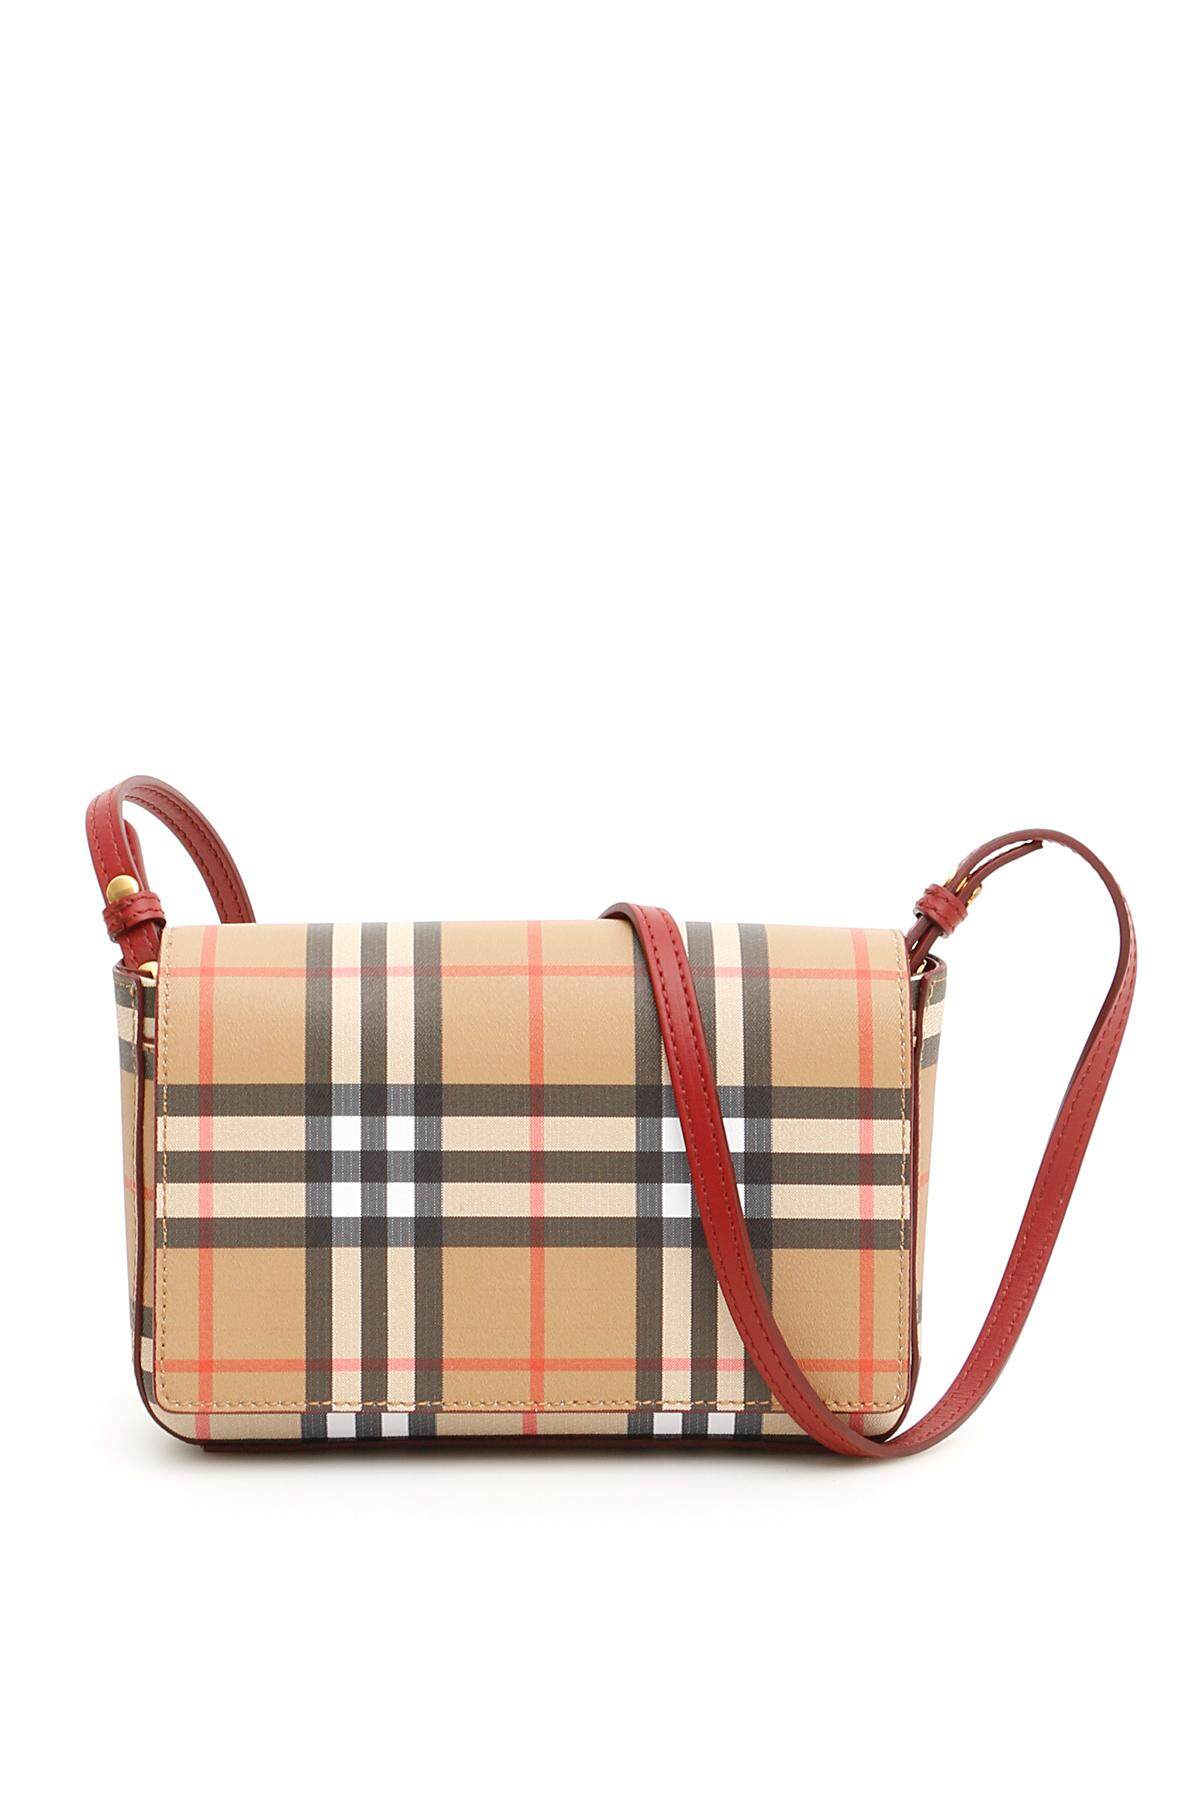 burberry bags 2018 prices